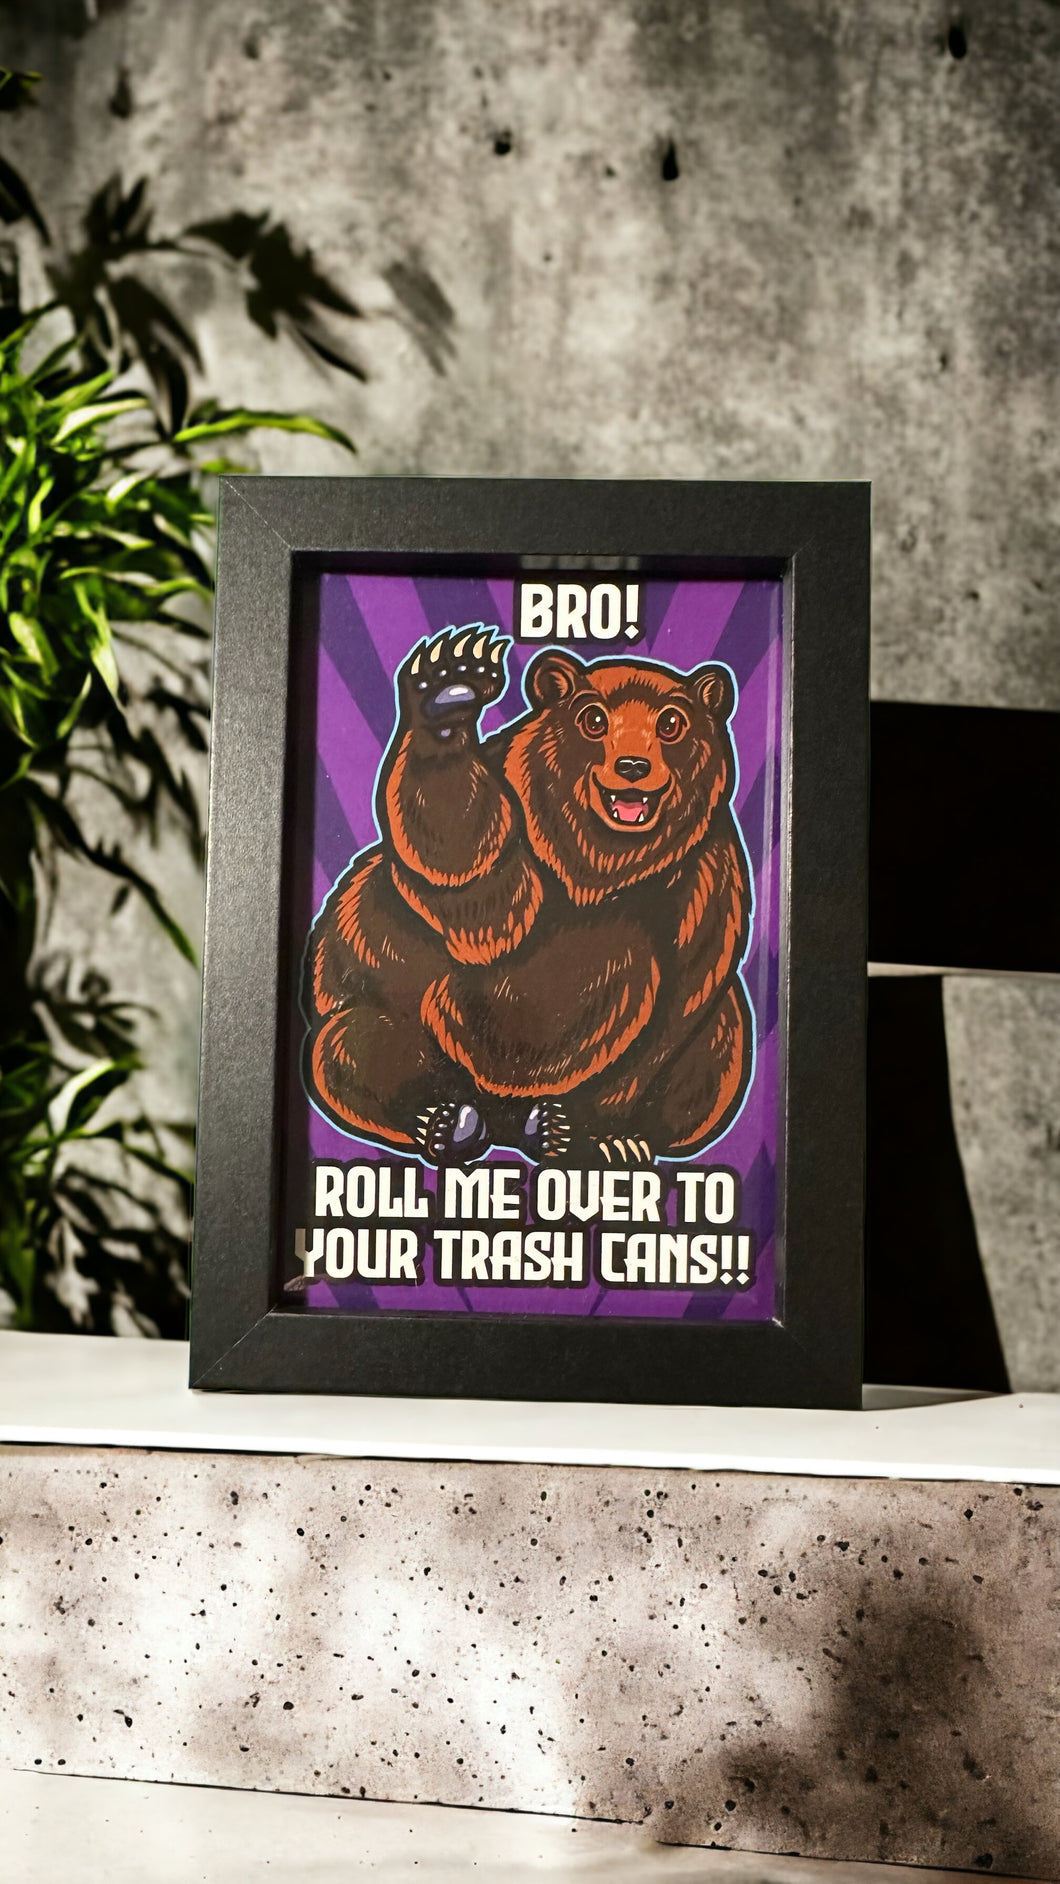  Bro! Roll me over to your trash cans! Grizzly Brown Bear - Framed 4 x 6 inch art print! 